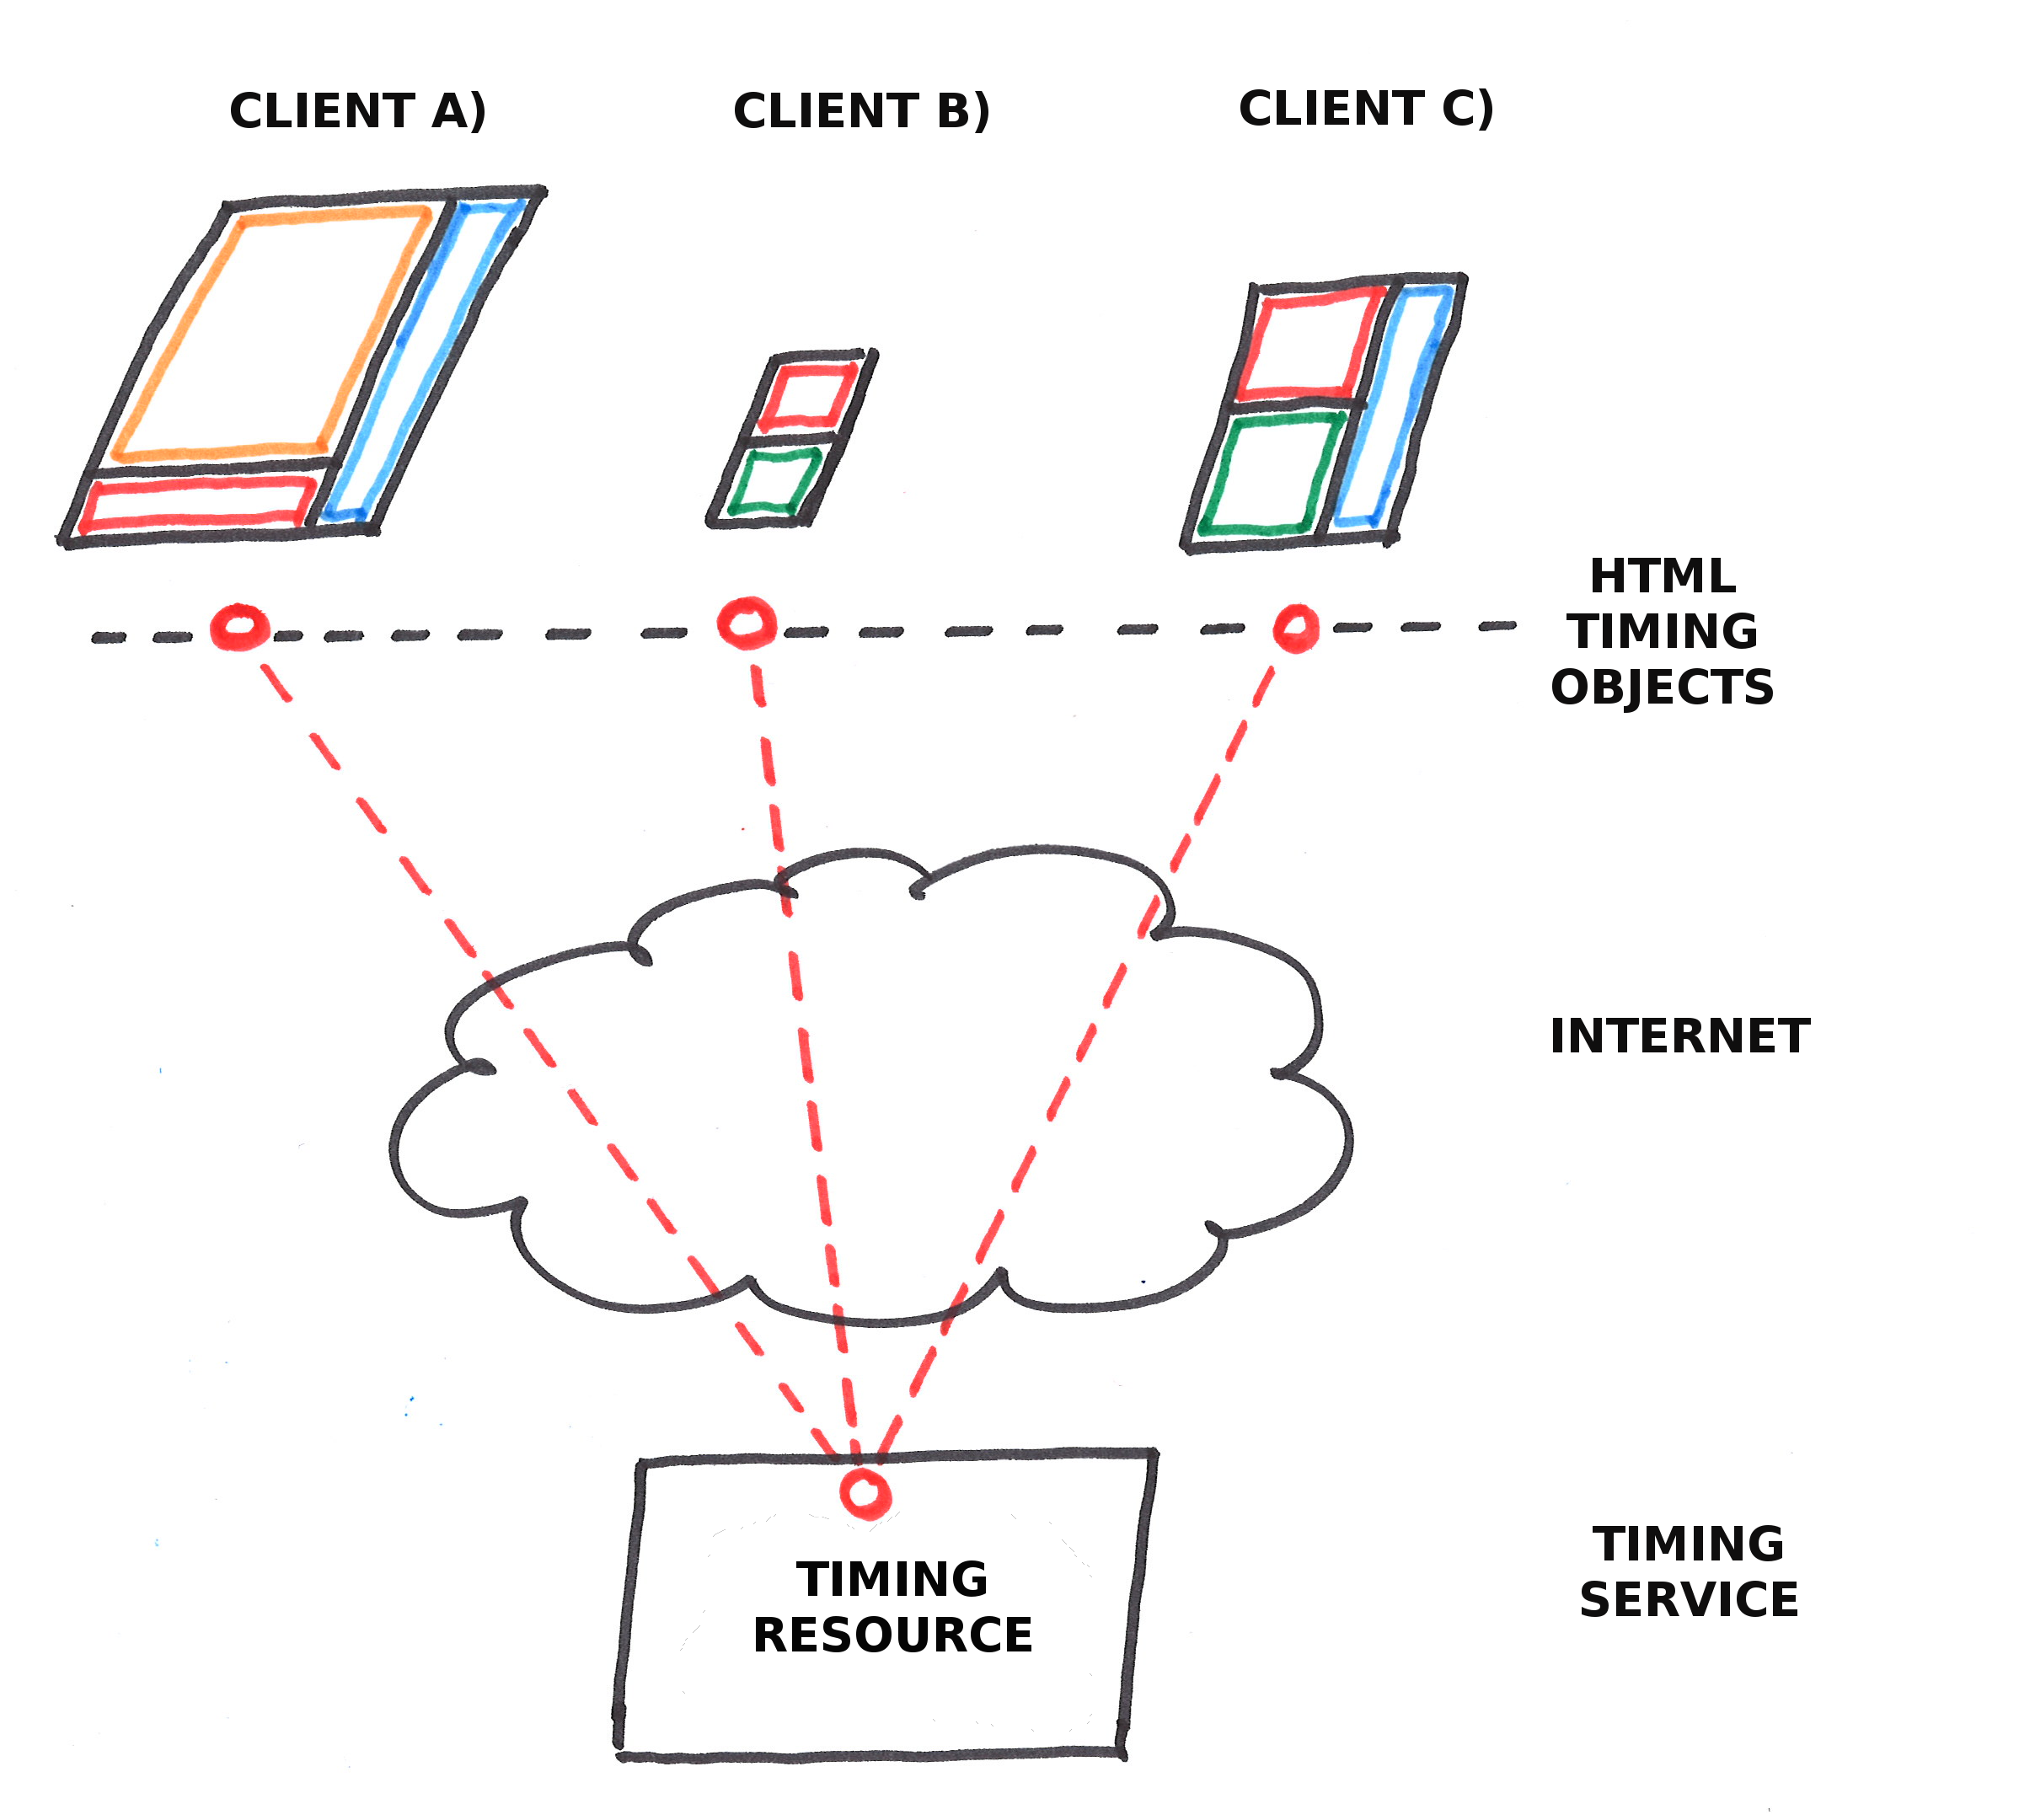 The image illustrates the concept of an online timing resource how it used to synchronize HTTPTimingObjects across three different Web clients.